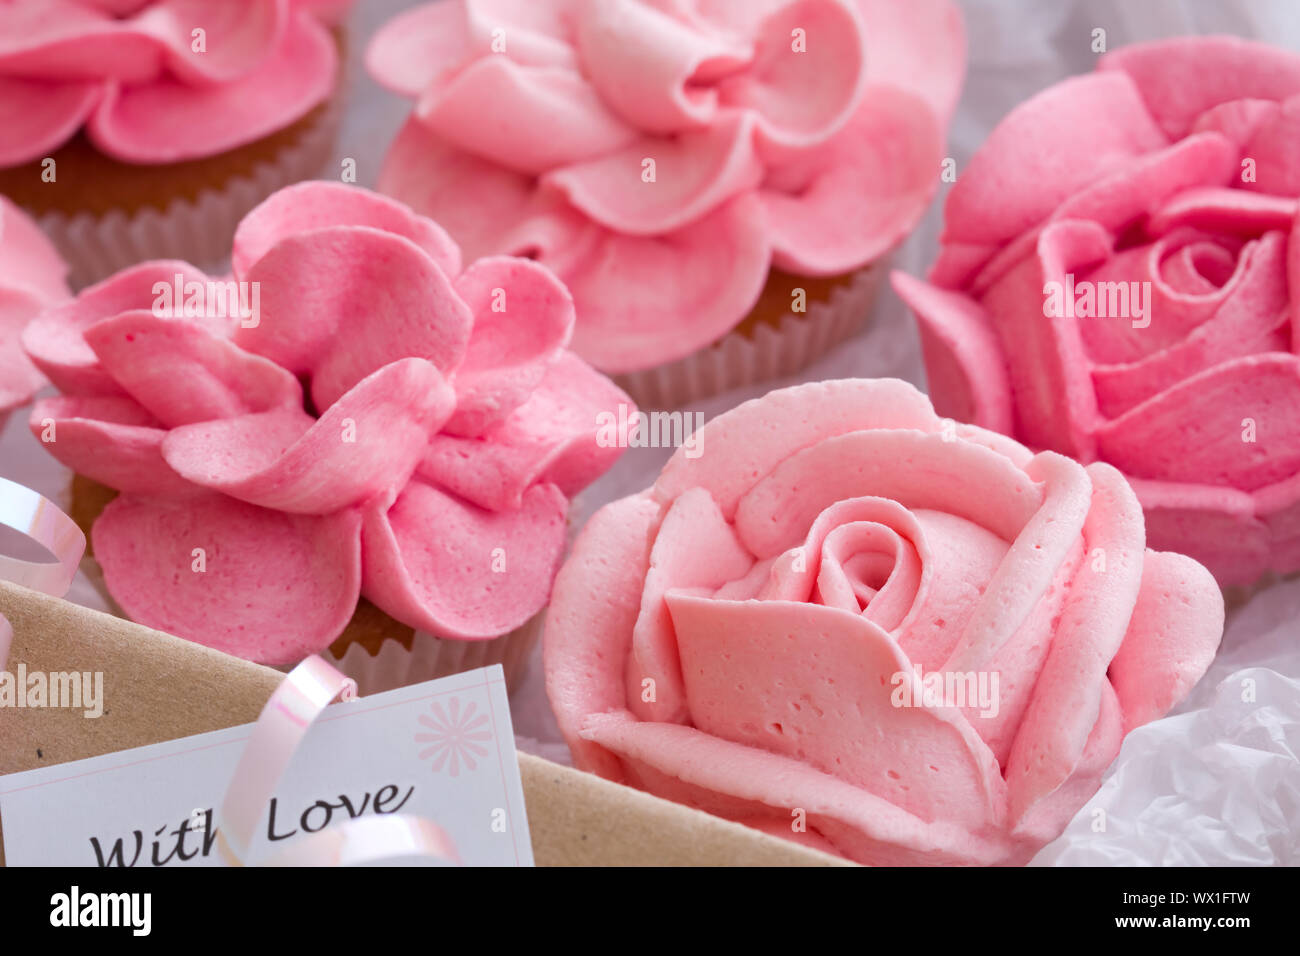 Gift box filled with delicious cupcakes Stock Photo